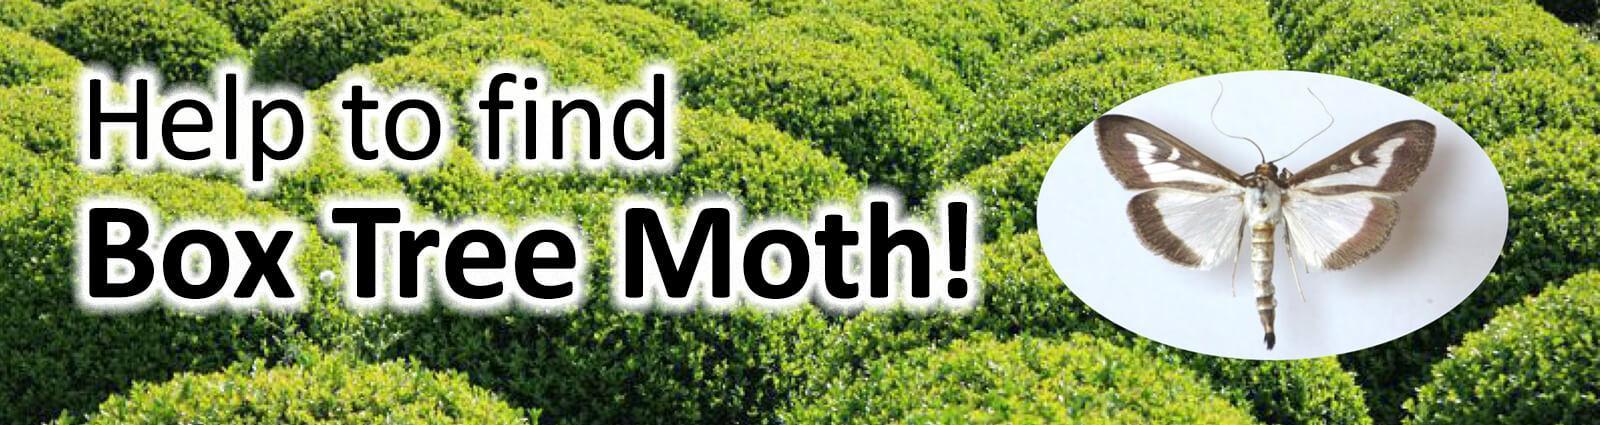 Landscape Ontario leads program to control the spread of box tree moth